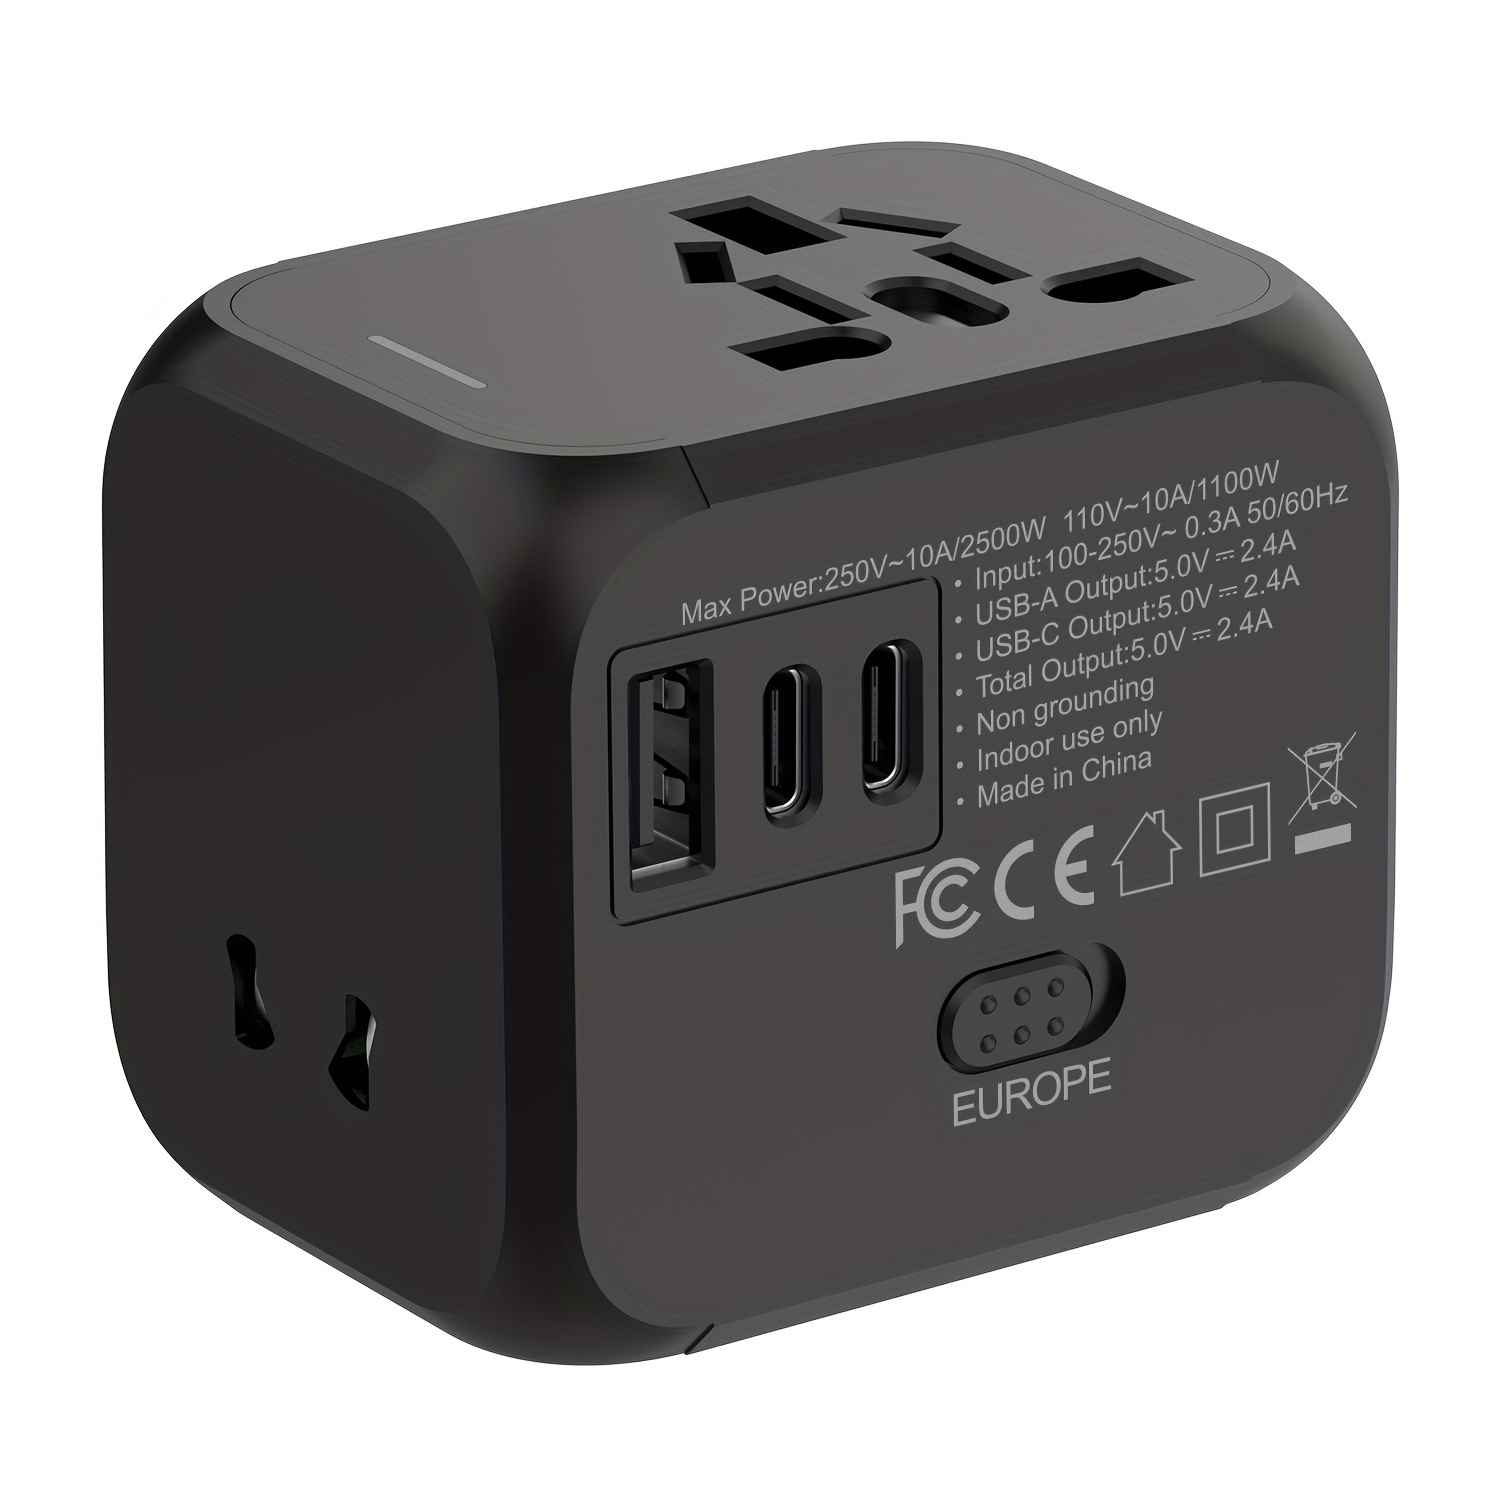 

Universal Travel Adapter - Compact & Safe, 1 Usb & 2 Type-c Charging Ports, Offering Multi-region Compatibility For Usa, Uk, Europe & More. Tailored For Over 180 Countries